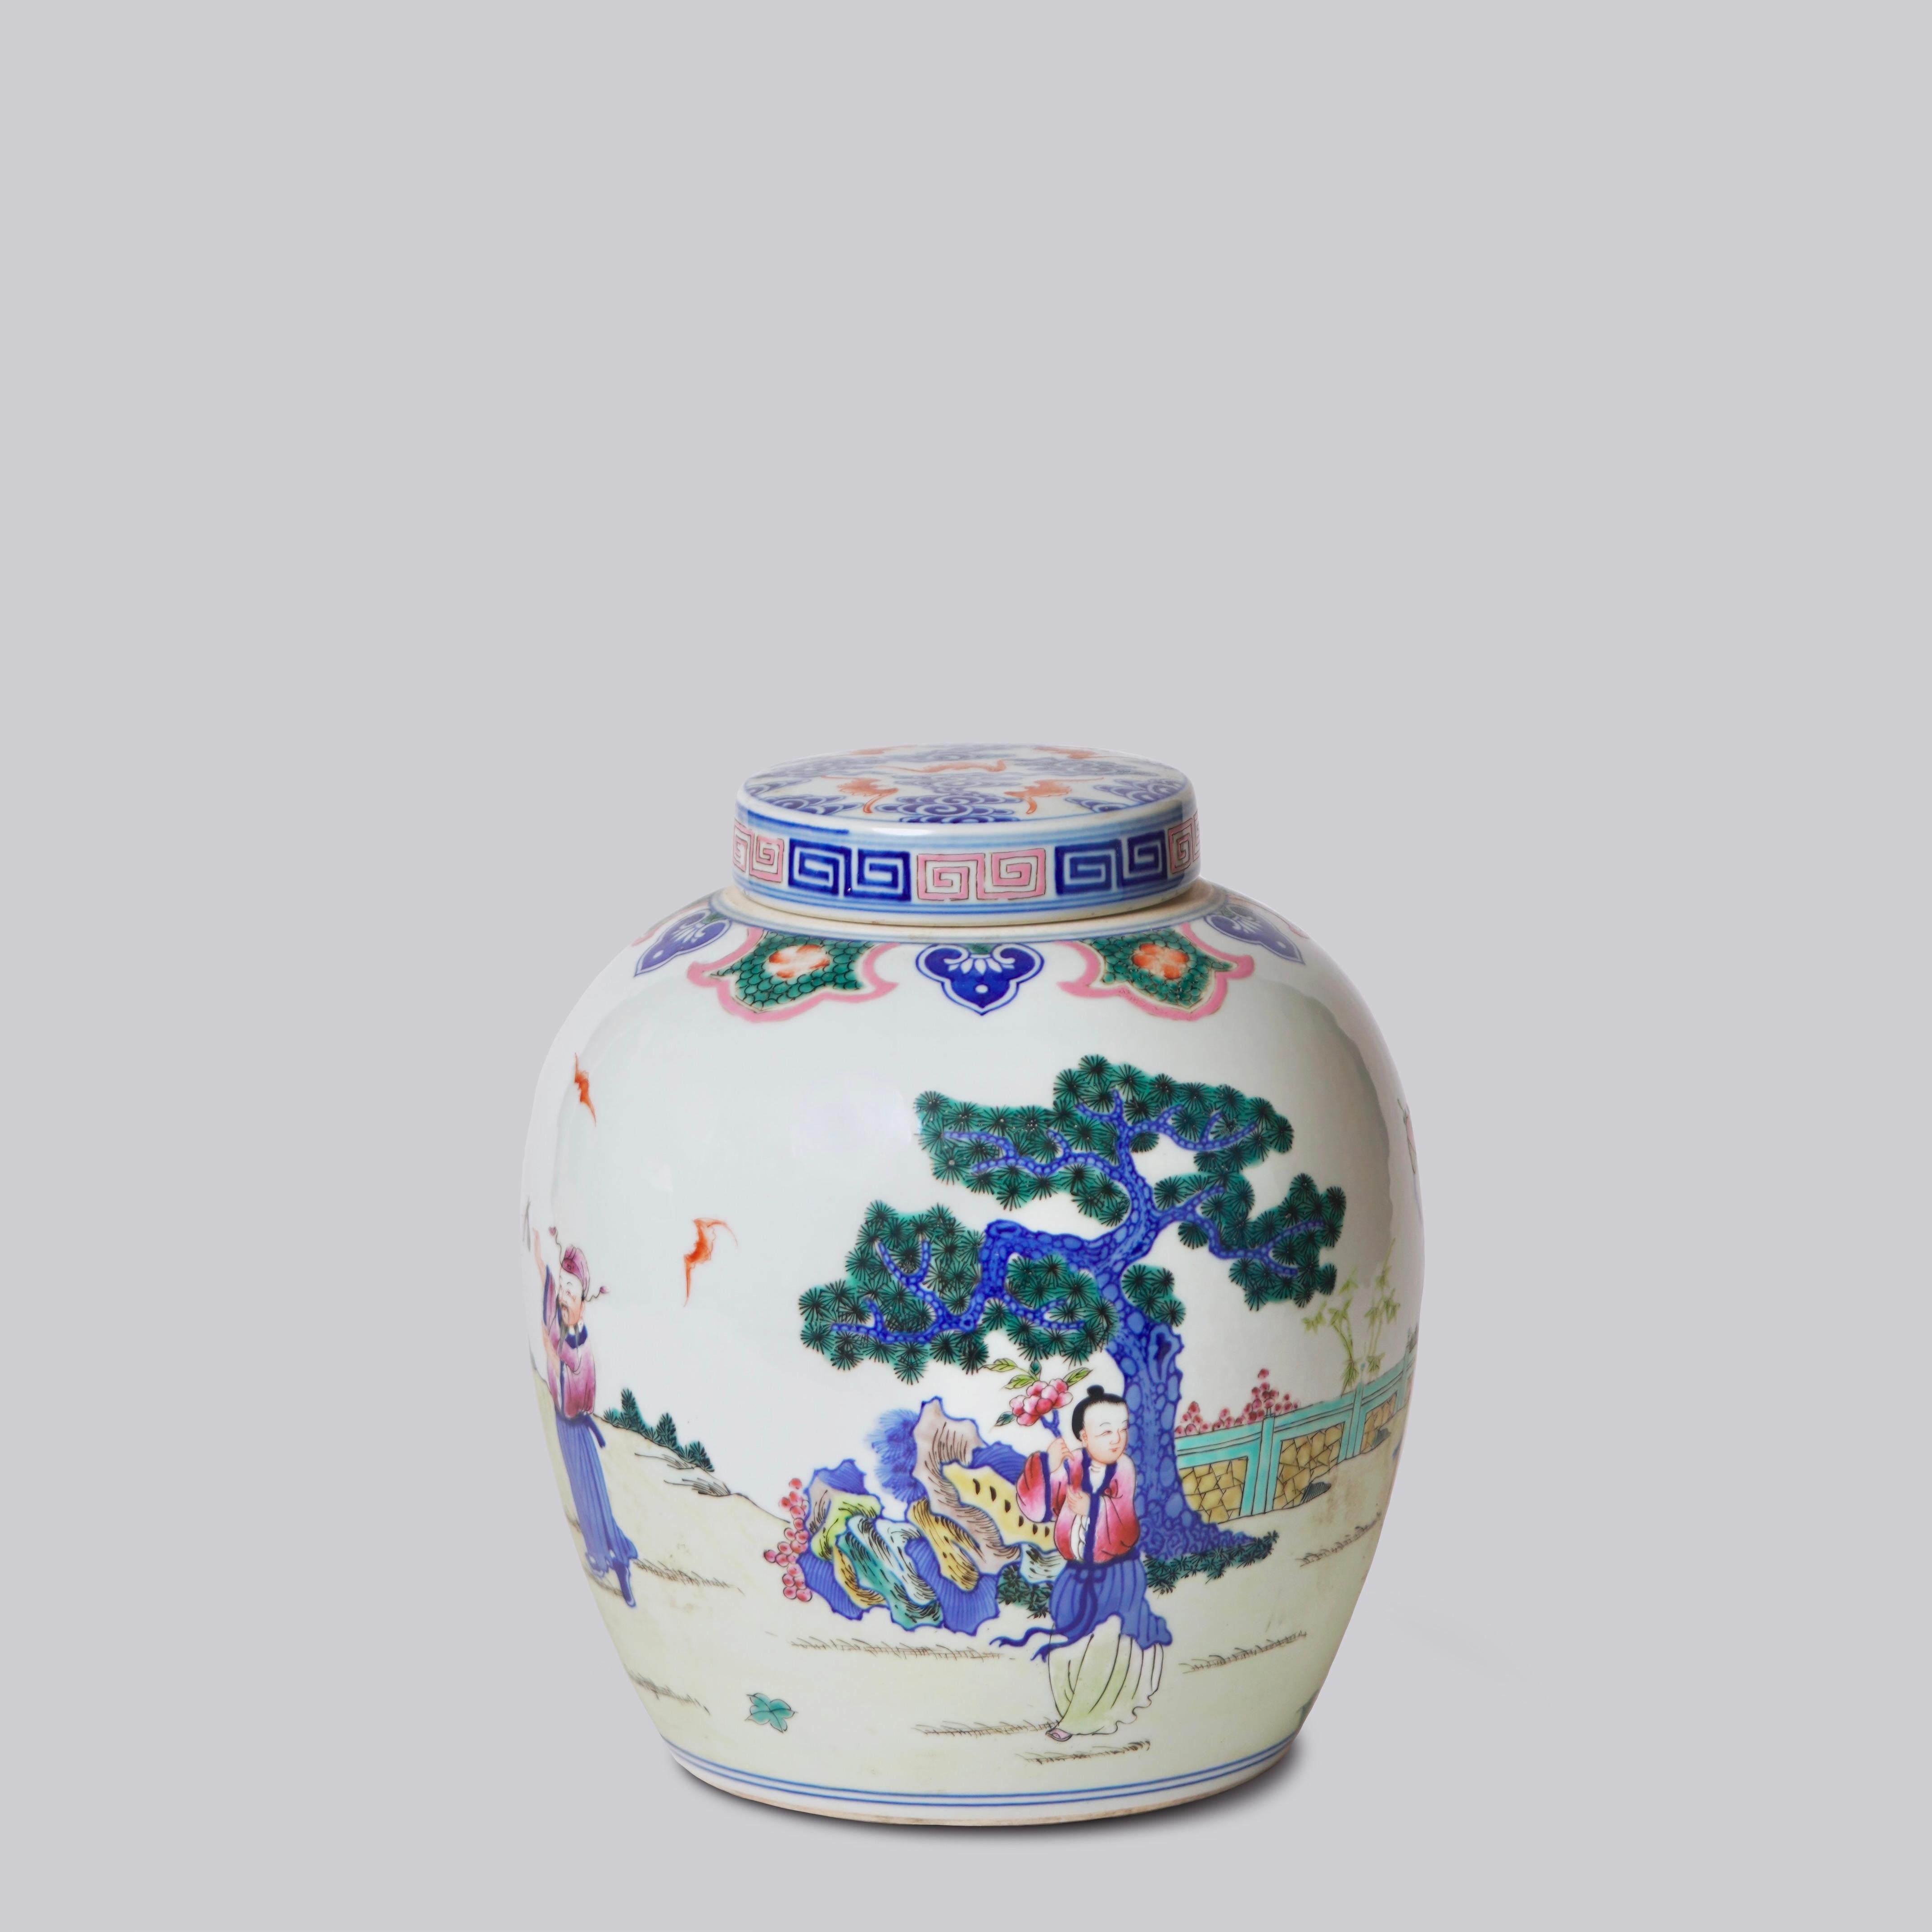 This unique vase is a traditional porcelain vessel from Jingdezhen, a town long distinguished by imperial patronage. This piece is a vintage famille bleu lidded container with a lively hand painted design of the 